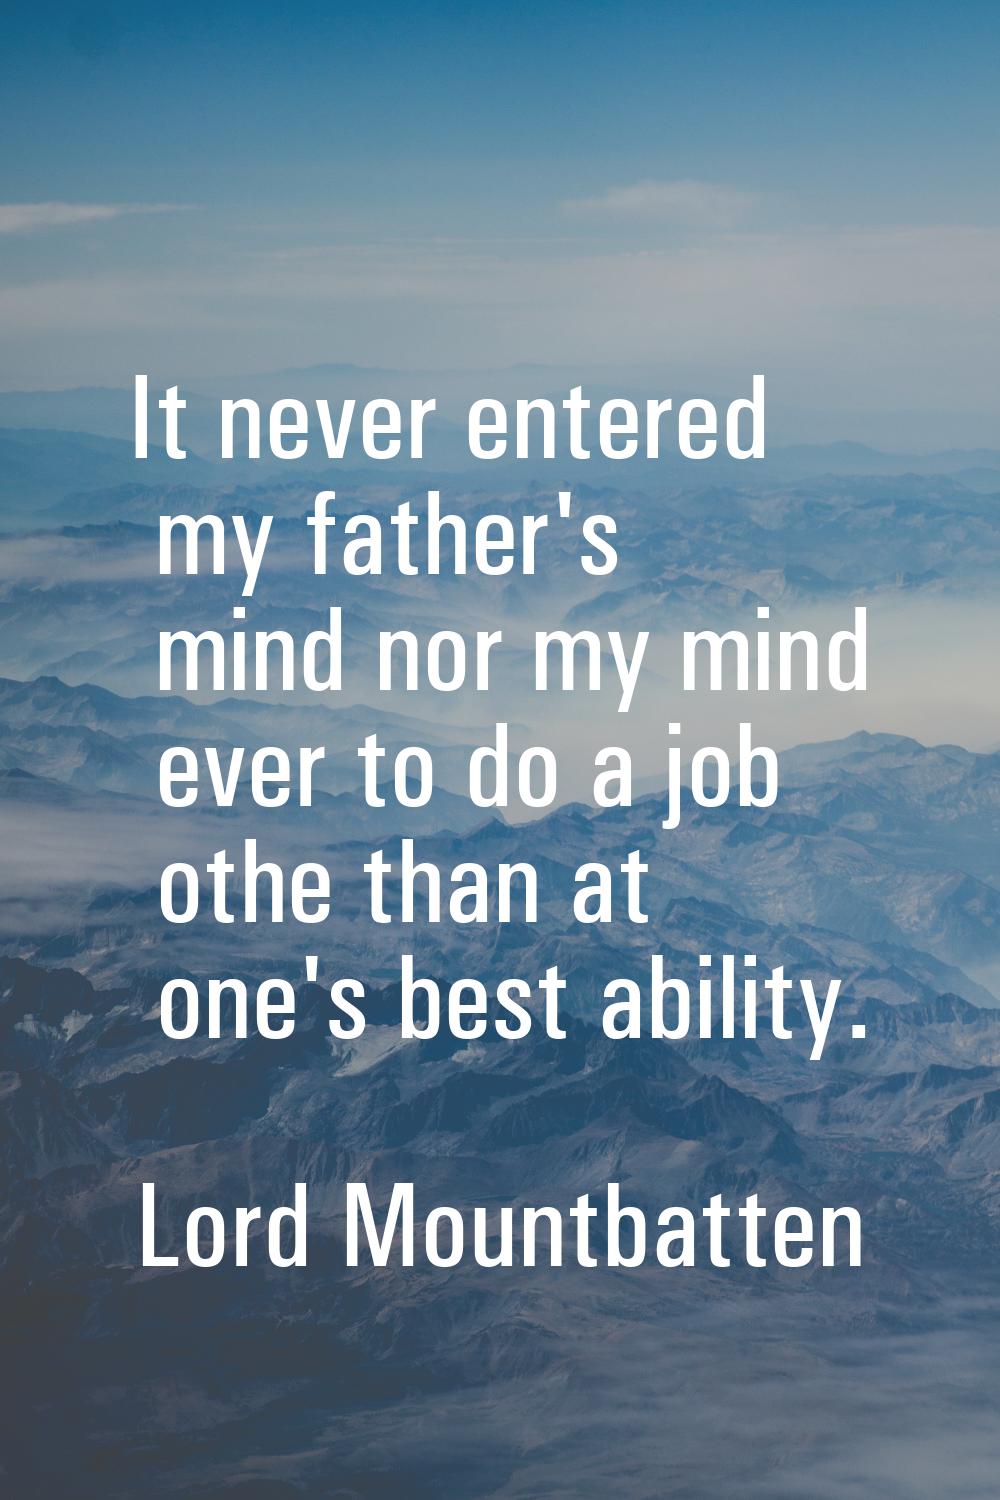 It never entered my father's mind nor my mind ever to do a job othe than at one's best ability.